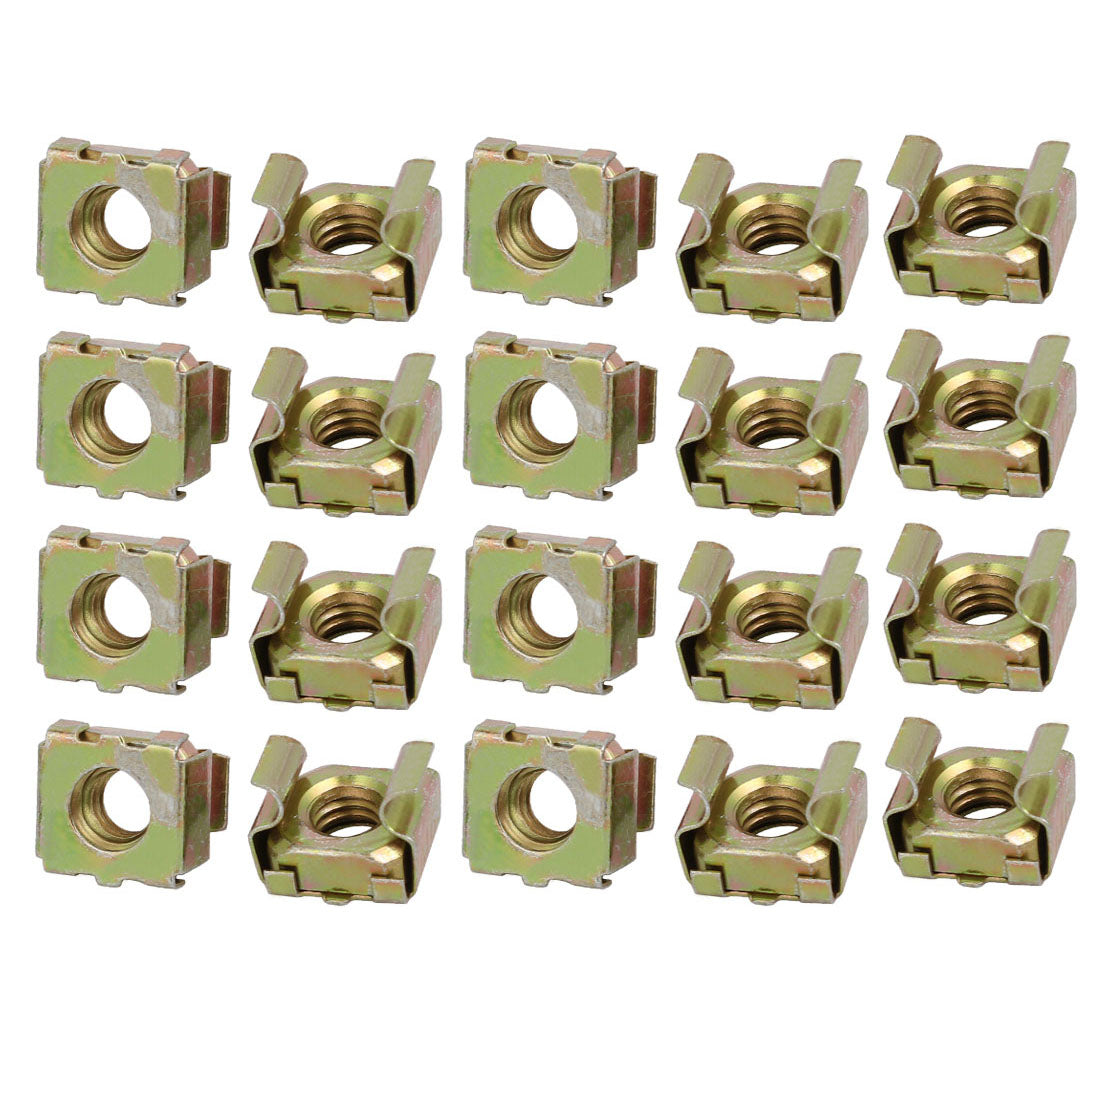 uxcell Uxcell 20pcs M6 65Mn Spring Steel Captive Cage Nut for Server Shelf Cabinet